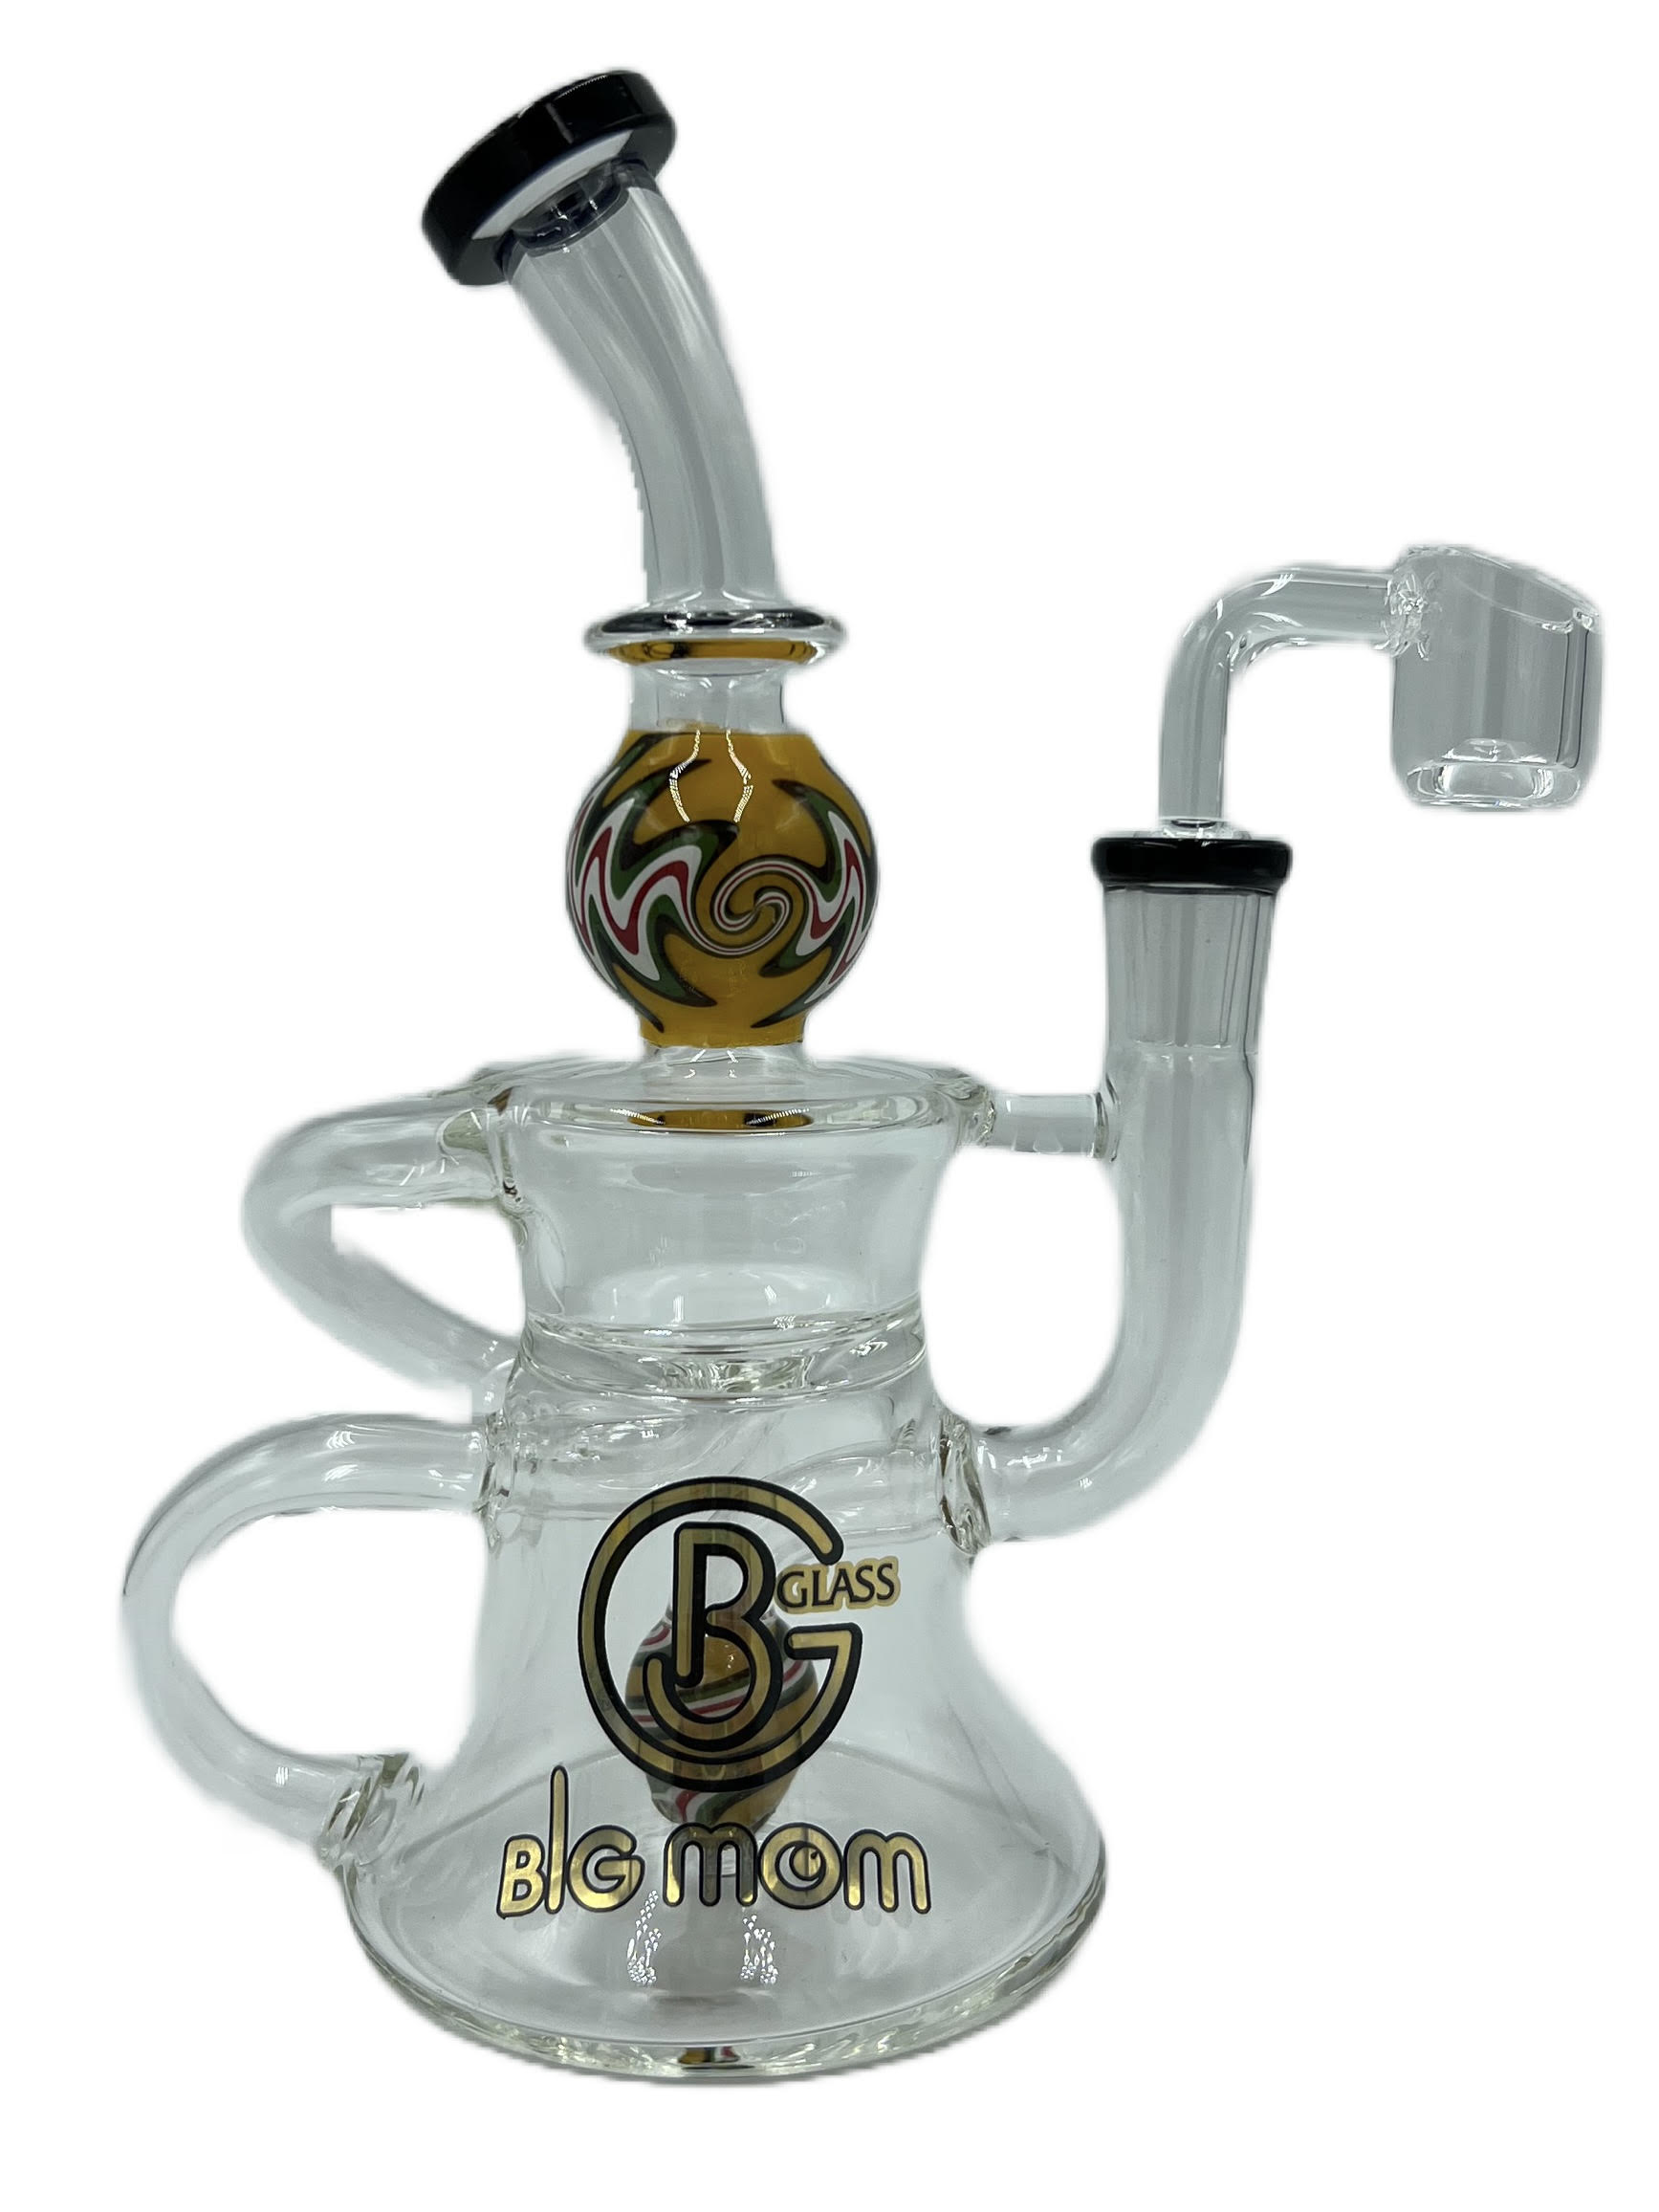 8” RECYCLER DAB RIG